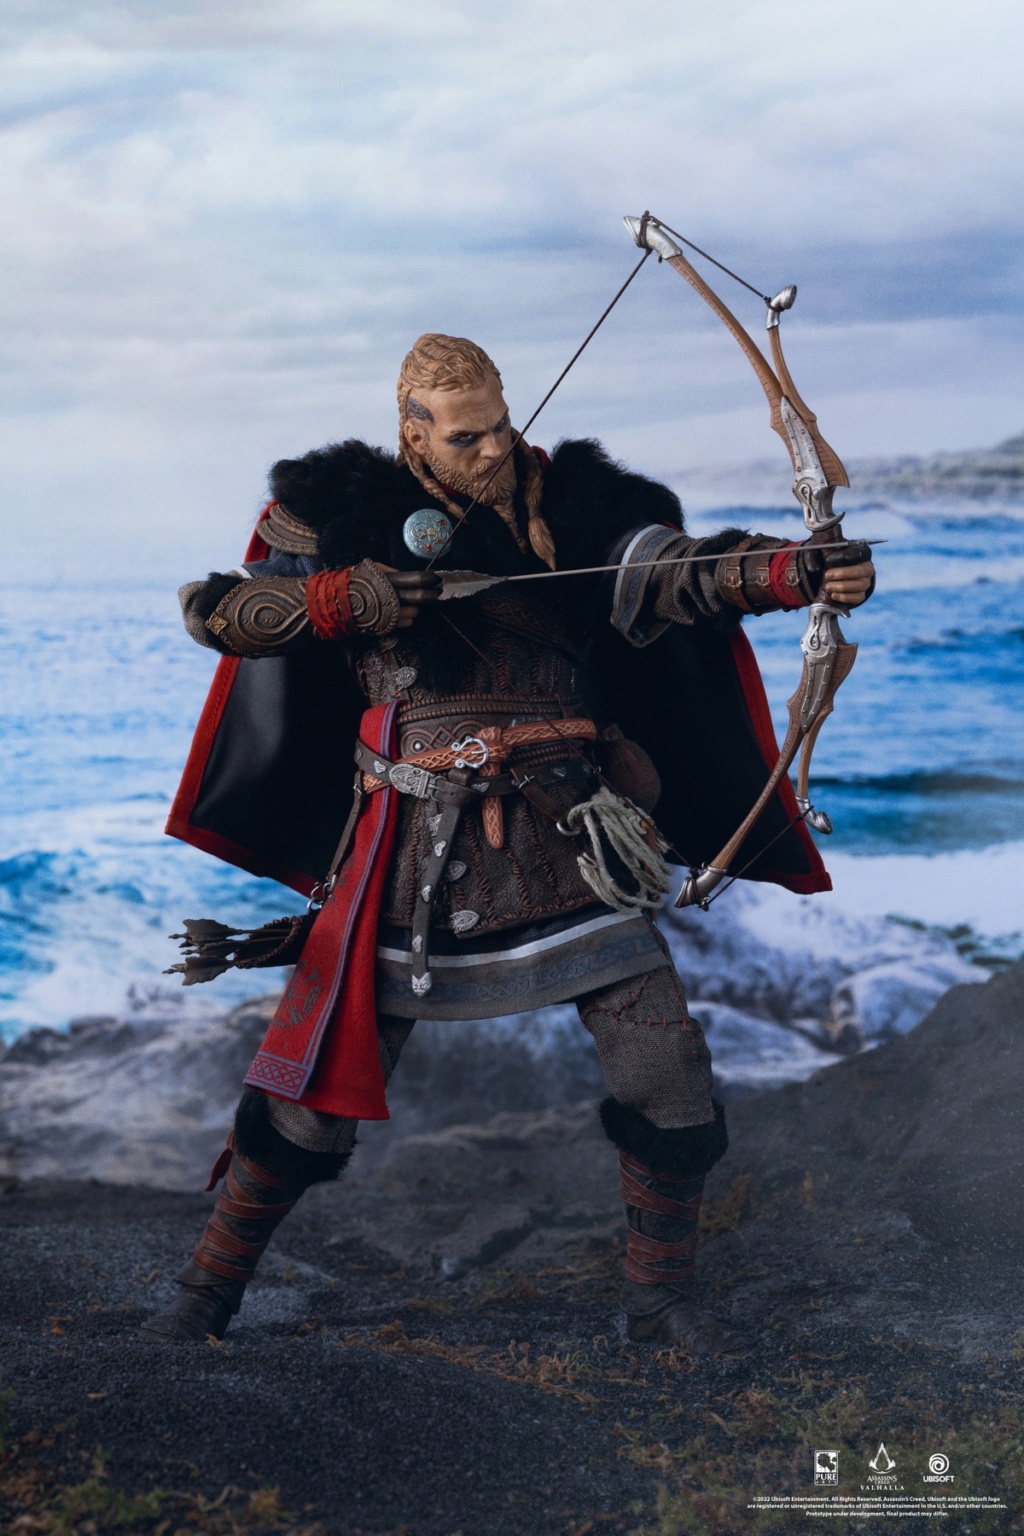 videogame - NEW PRODUCT: Pure Arts: 1/6 "Assassin's Creed: Valhalla" - Eivor Action Figure 9ce27810